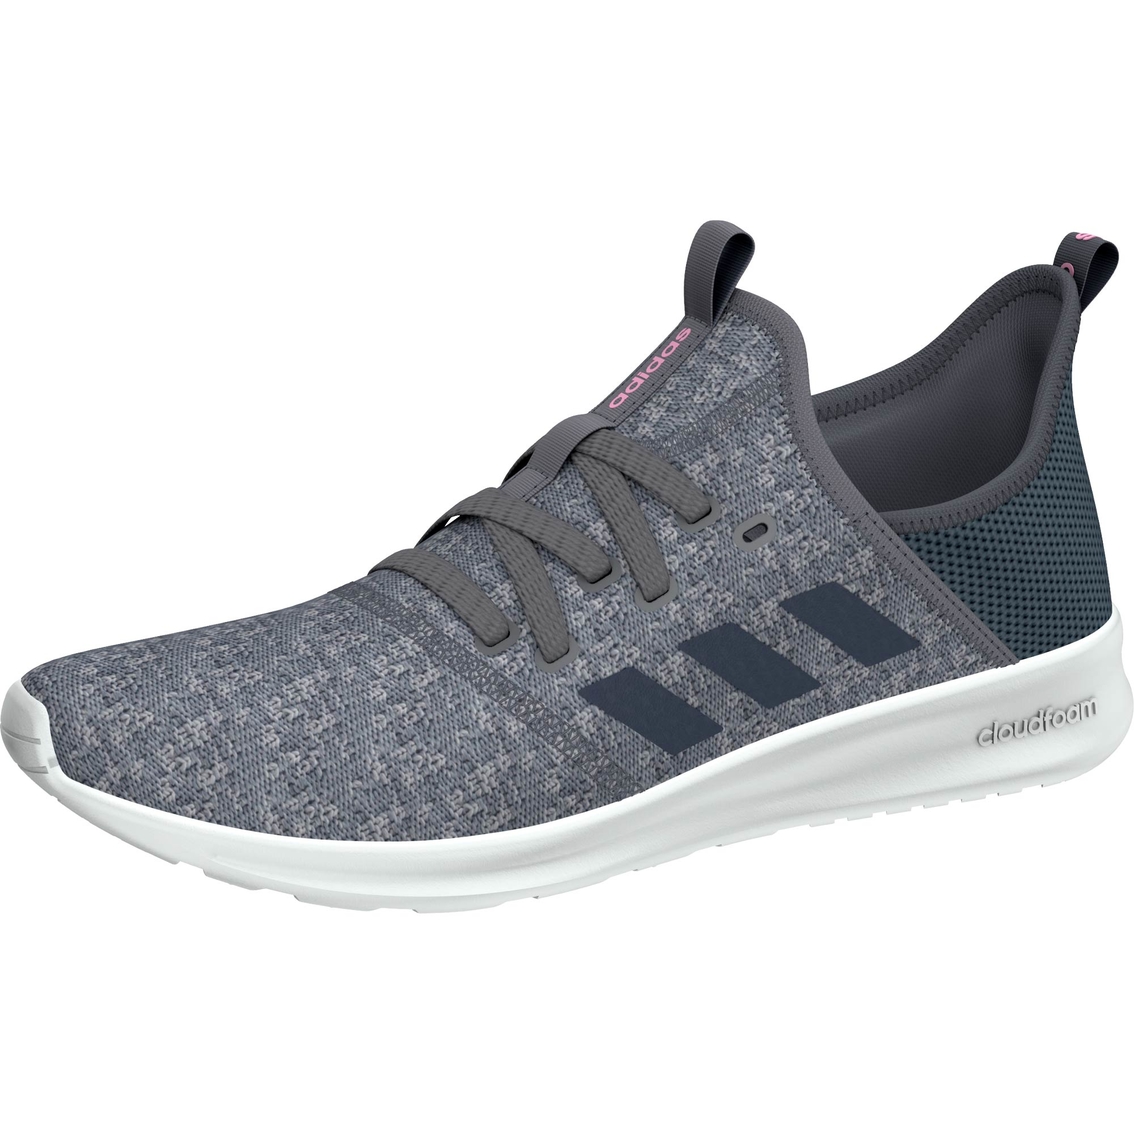 Adidas Cloudfoam Pure Running Shoes | Women's Athletic Shoes | Shoes ...